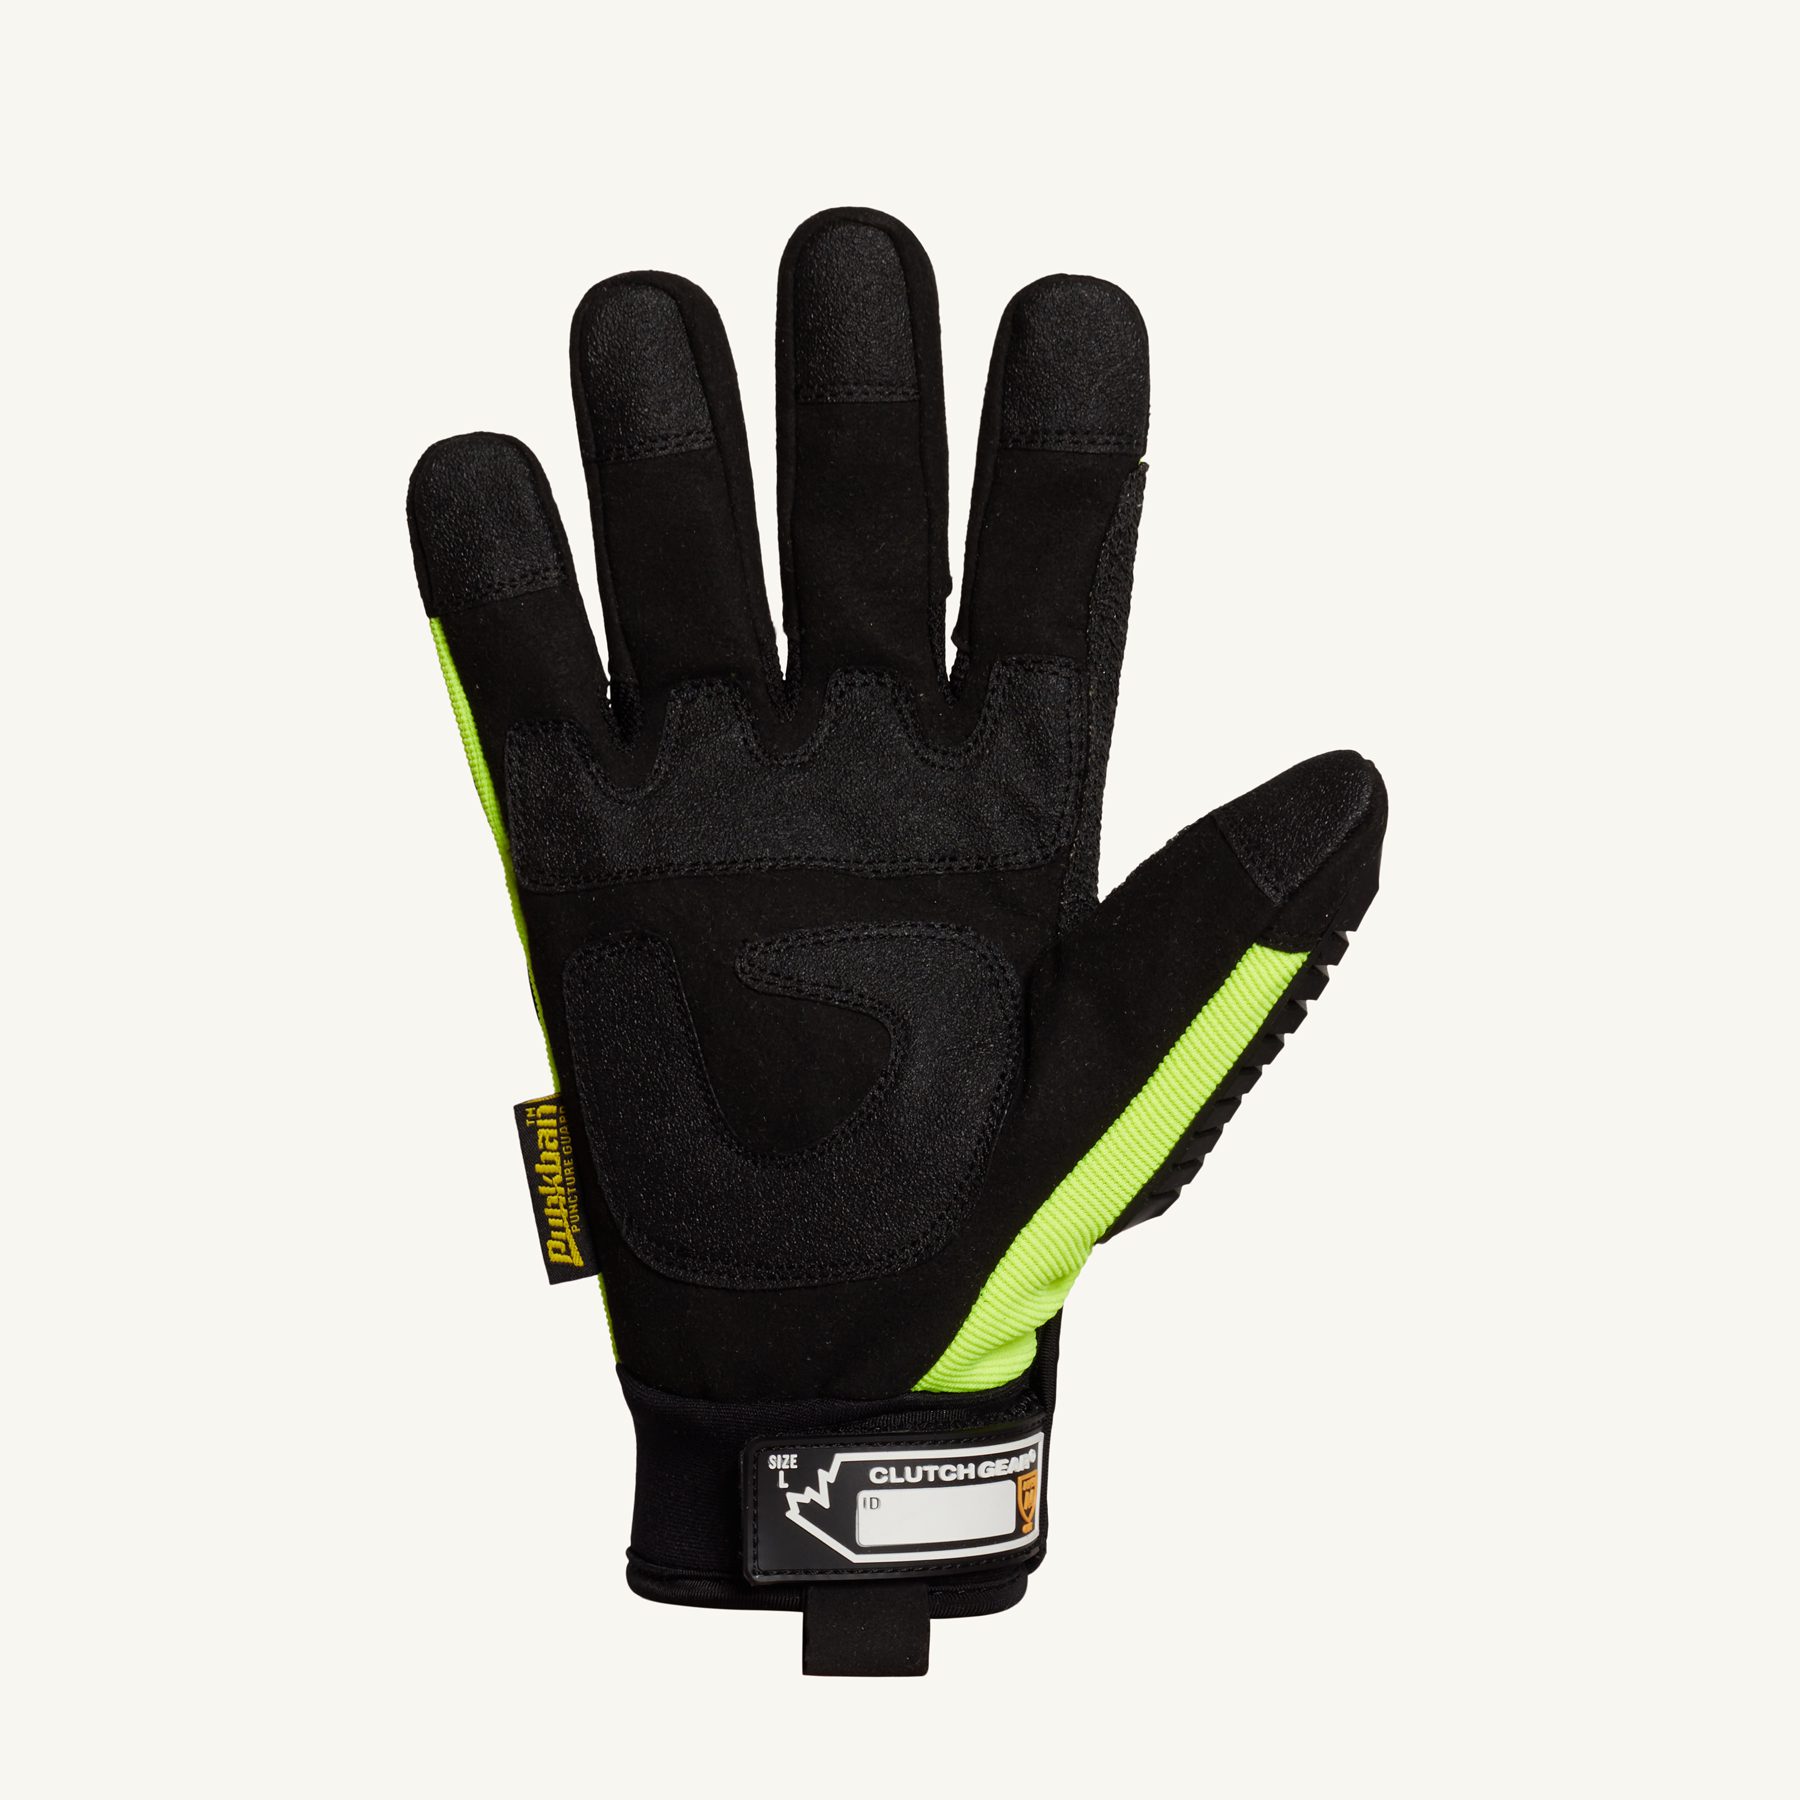 #MXVSBPB Superior Glove® Clutch Gear® Impact Protection Mechanics Glove Lined with Punkban™